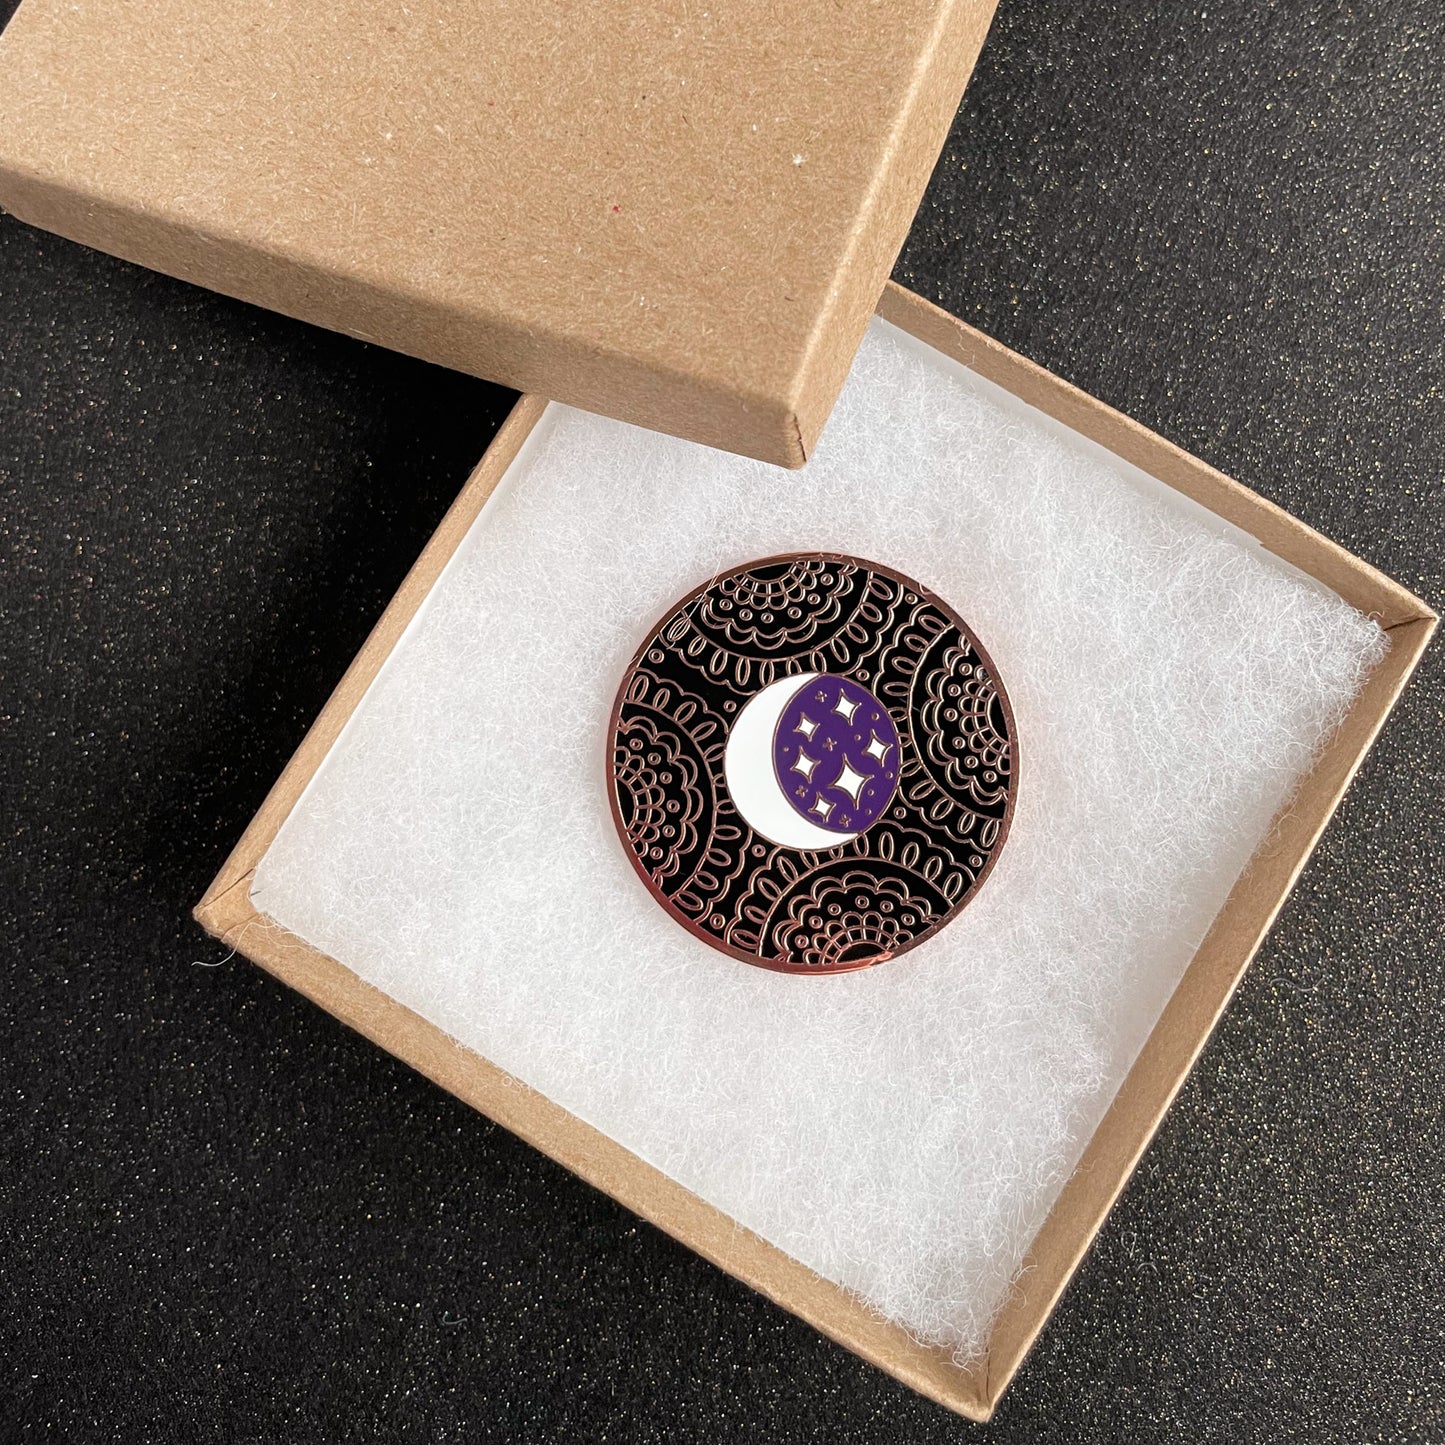 A coin with a moon and stars on it with a black lace background. It is in a kraft paper box on a black glitter background.